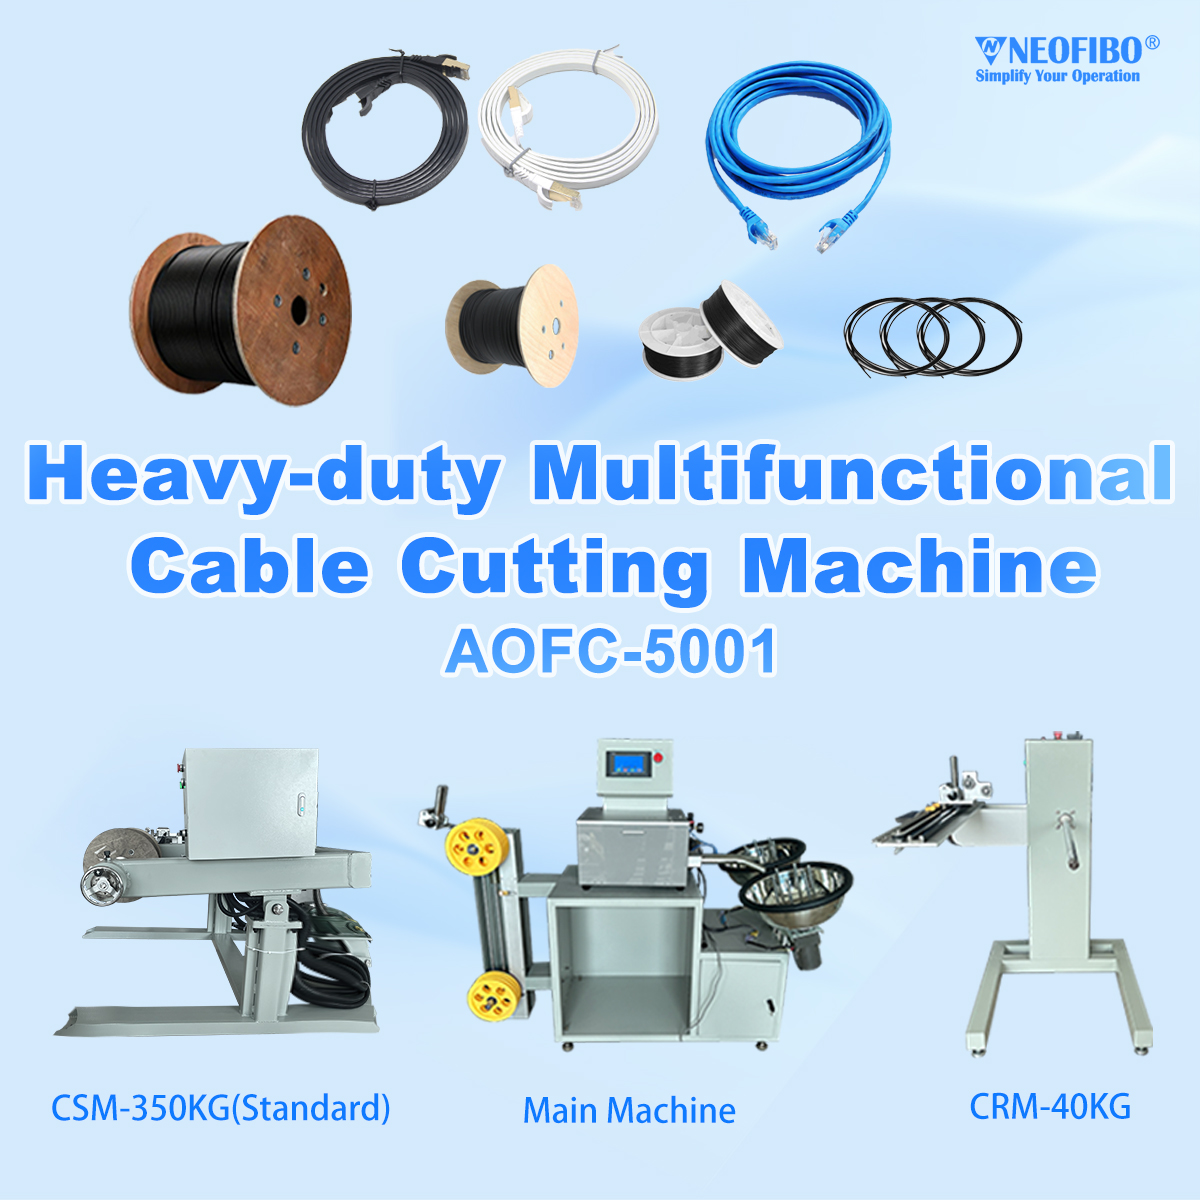 Heavy-duty Multifunctional Cable Cutting Machine AOFC-5001